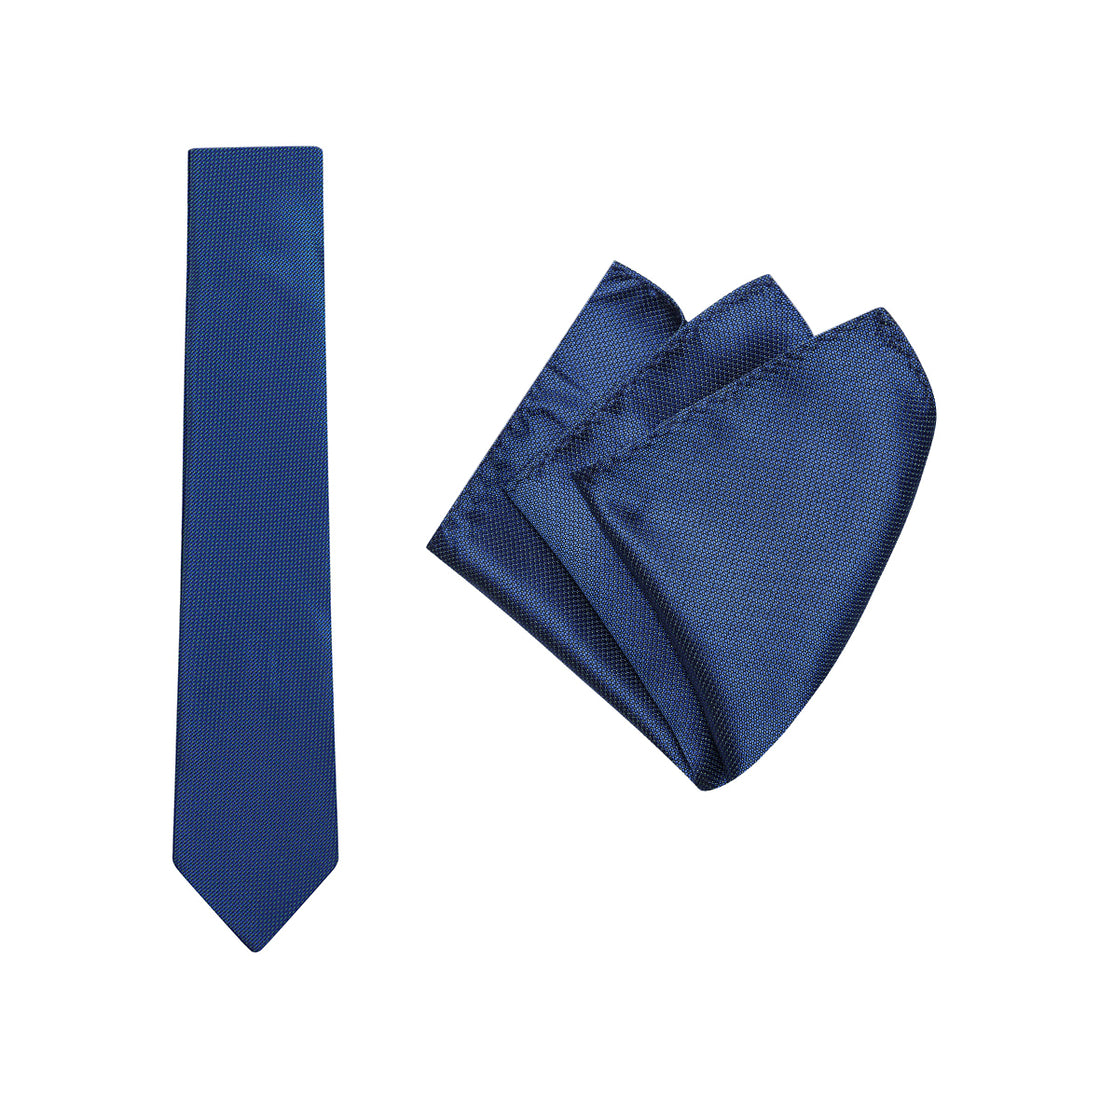 TIE + POCKET SQUARE SET. Micro Spot. Blue. Supplied with matching pocket square.-Ties-PEROZ Accessories